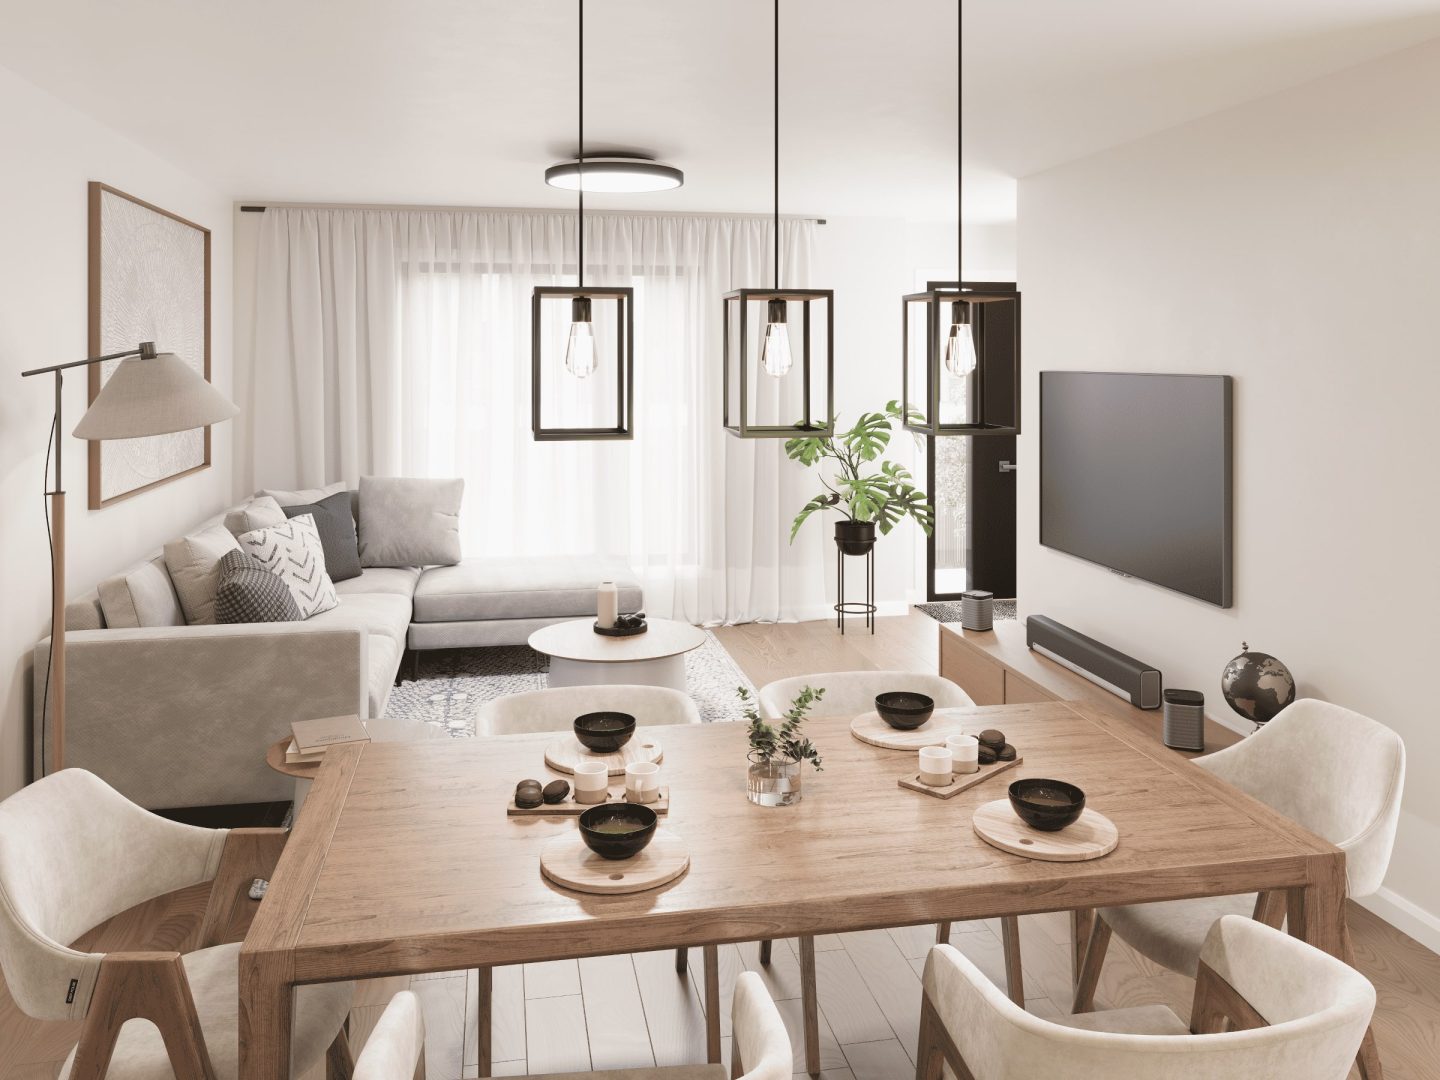 The Onesto model is a single-story townhouse in contemporary style. View from the living room.